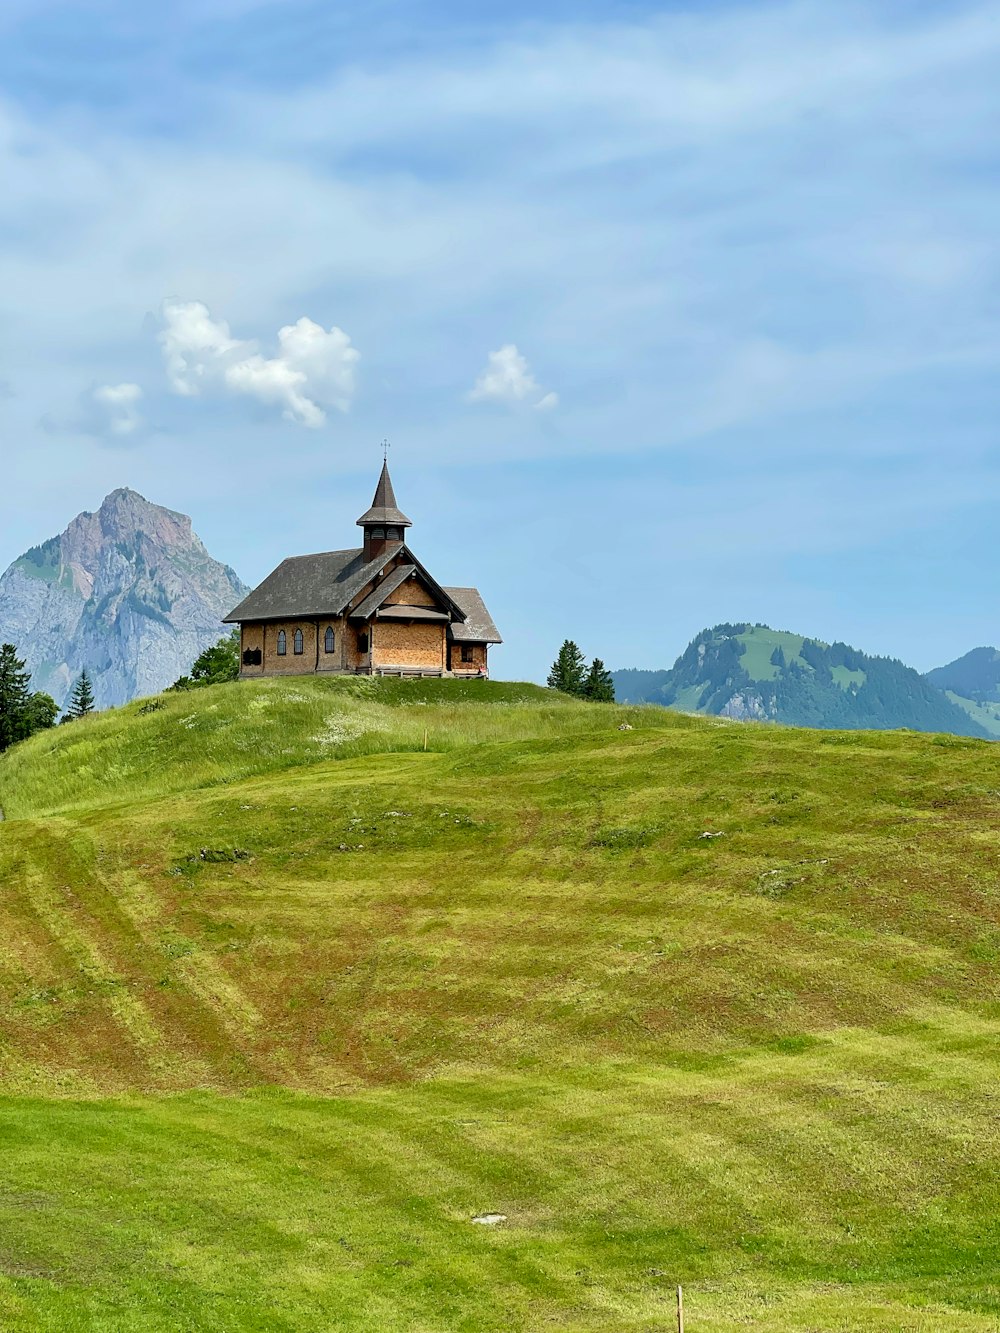 brown and black house on green grass field near mountain under white clouds during daytime